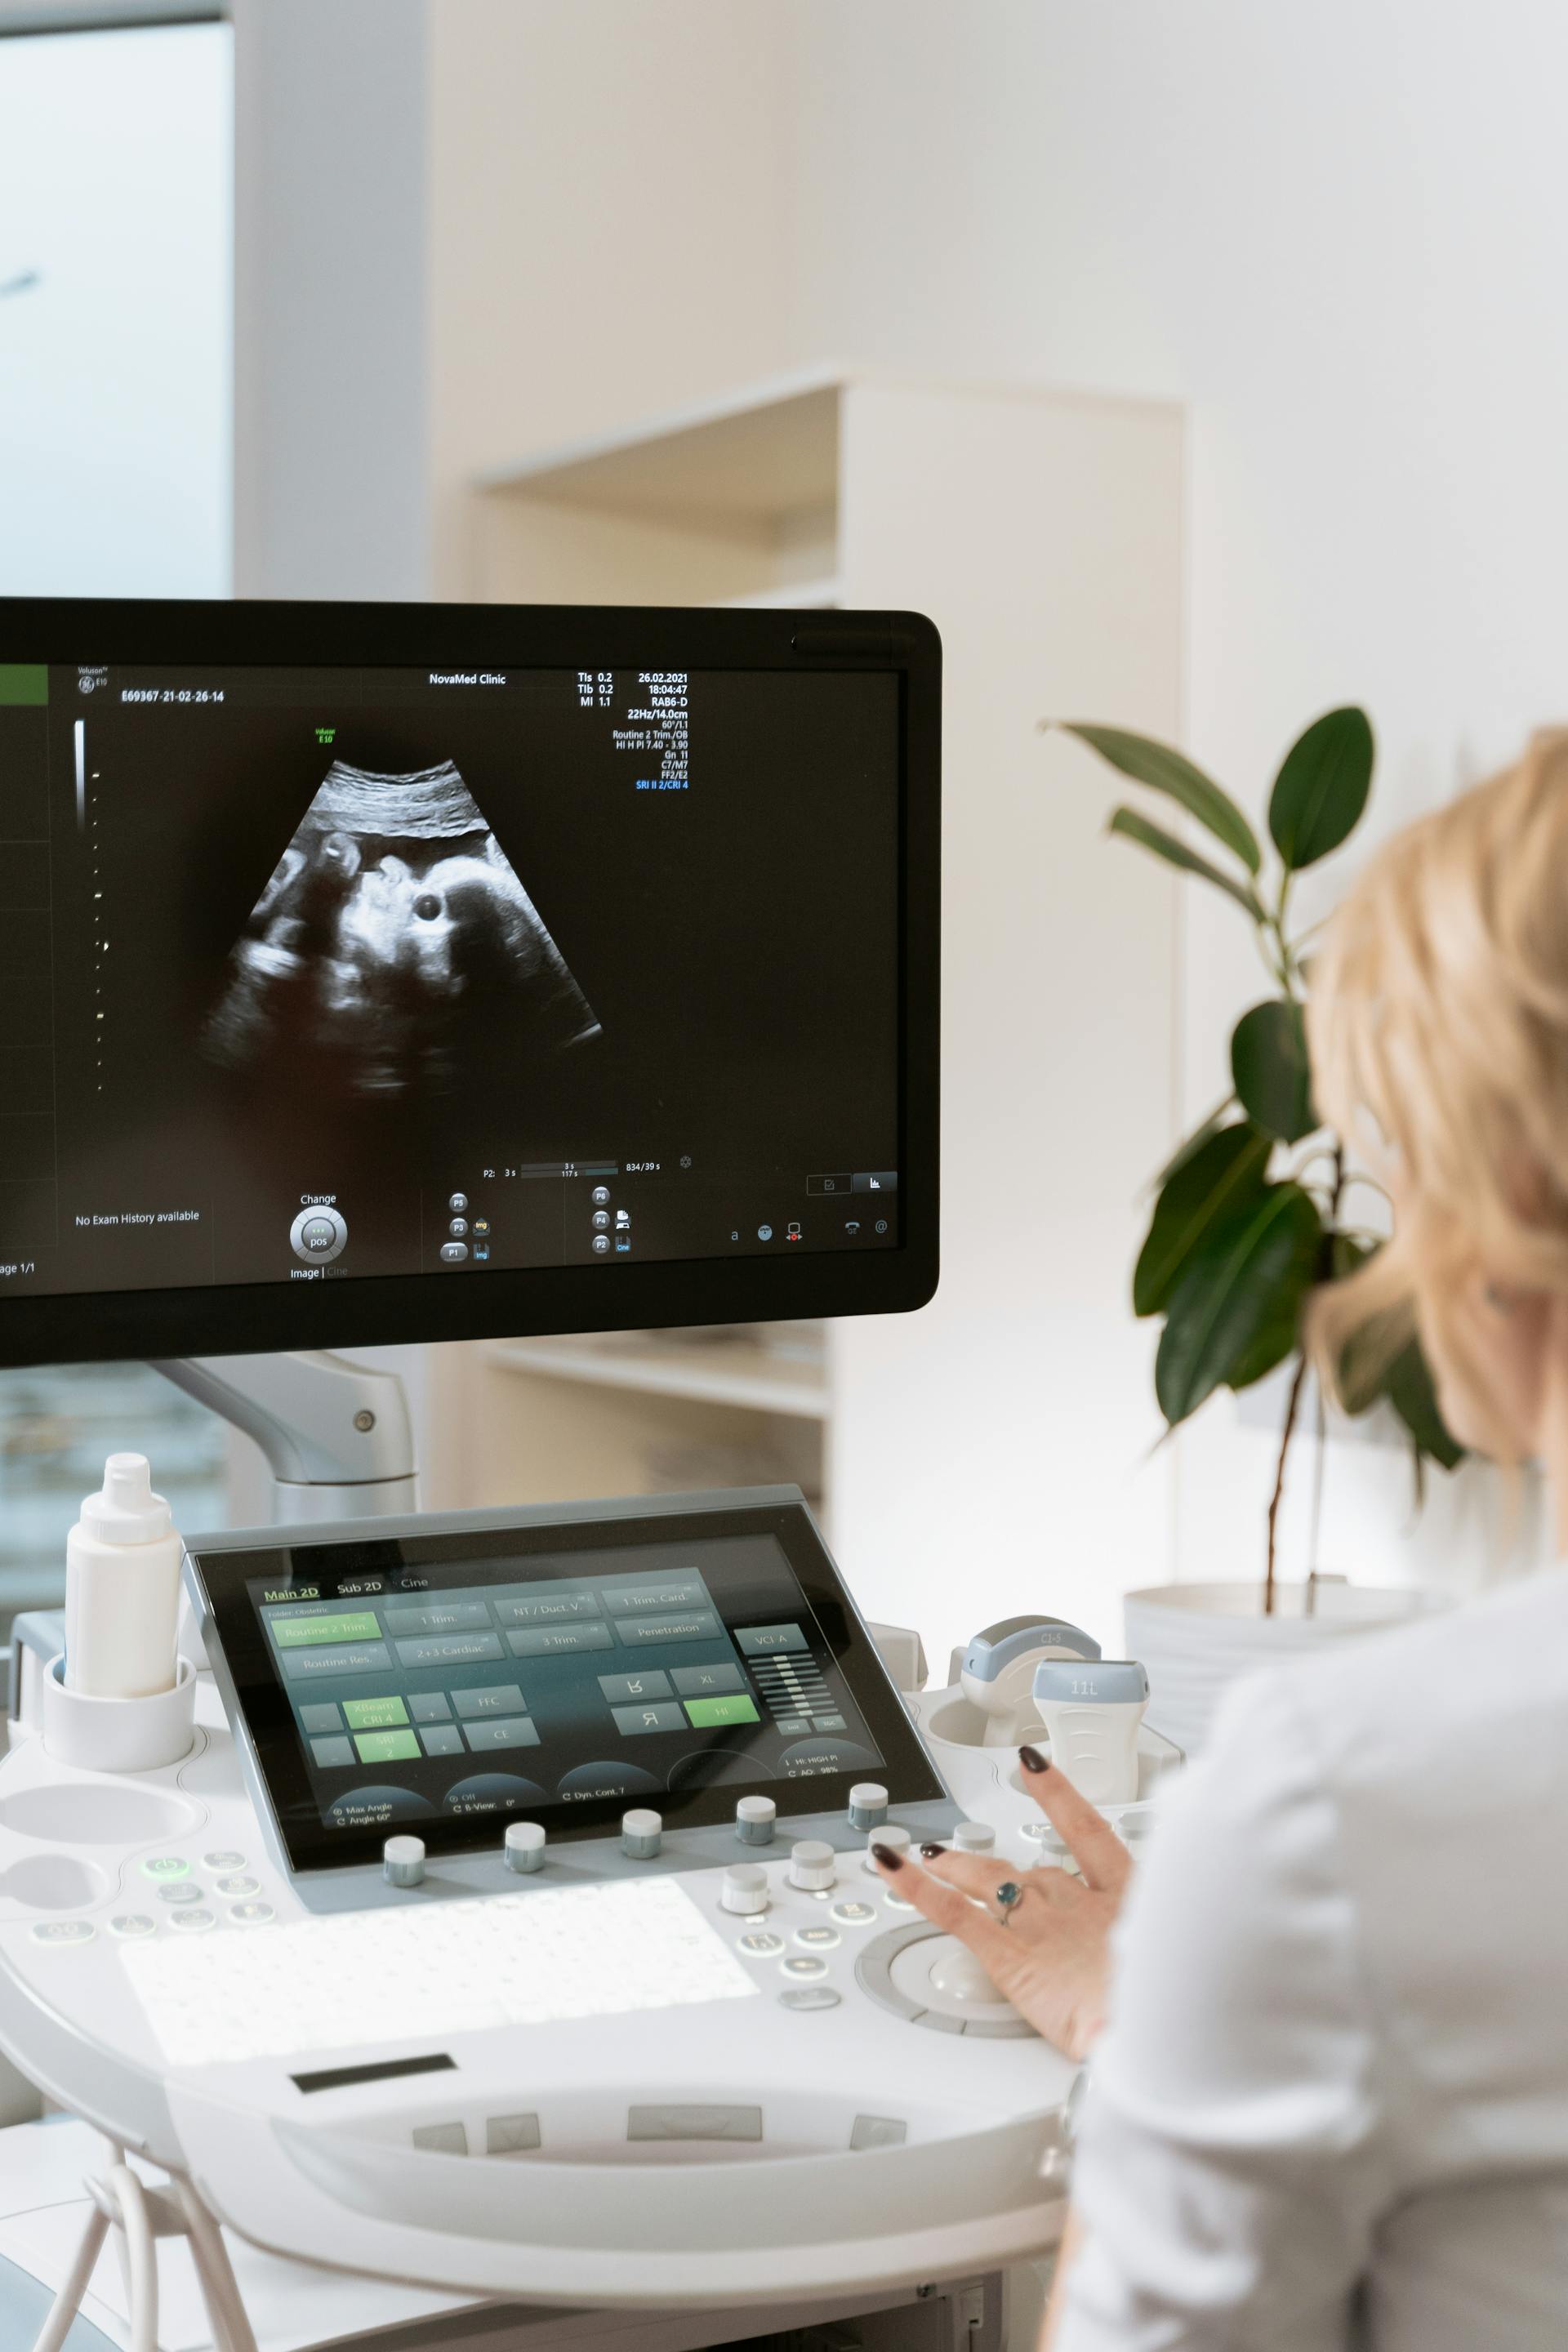 A person having an ultrasound | Source: Pexels